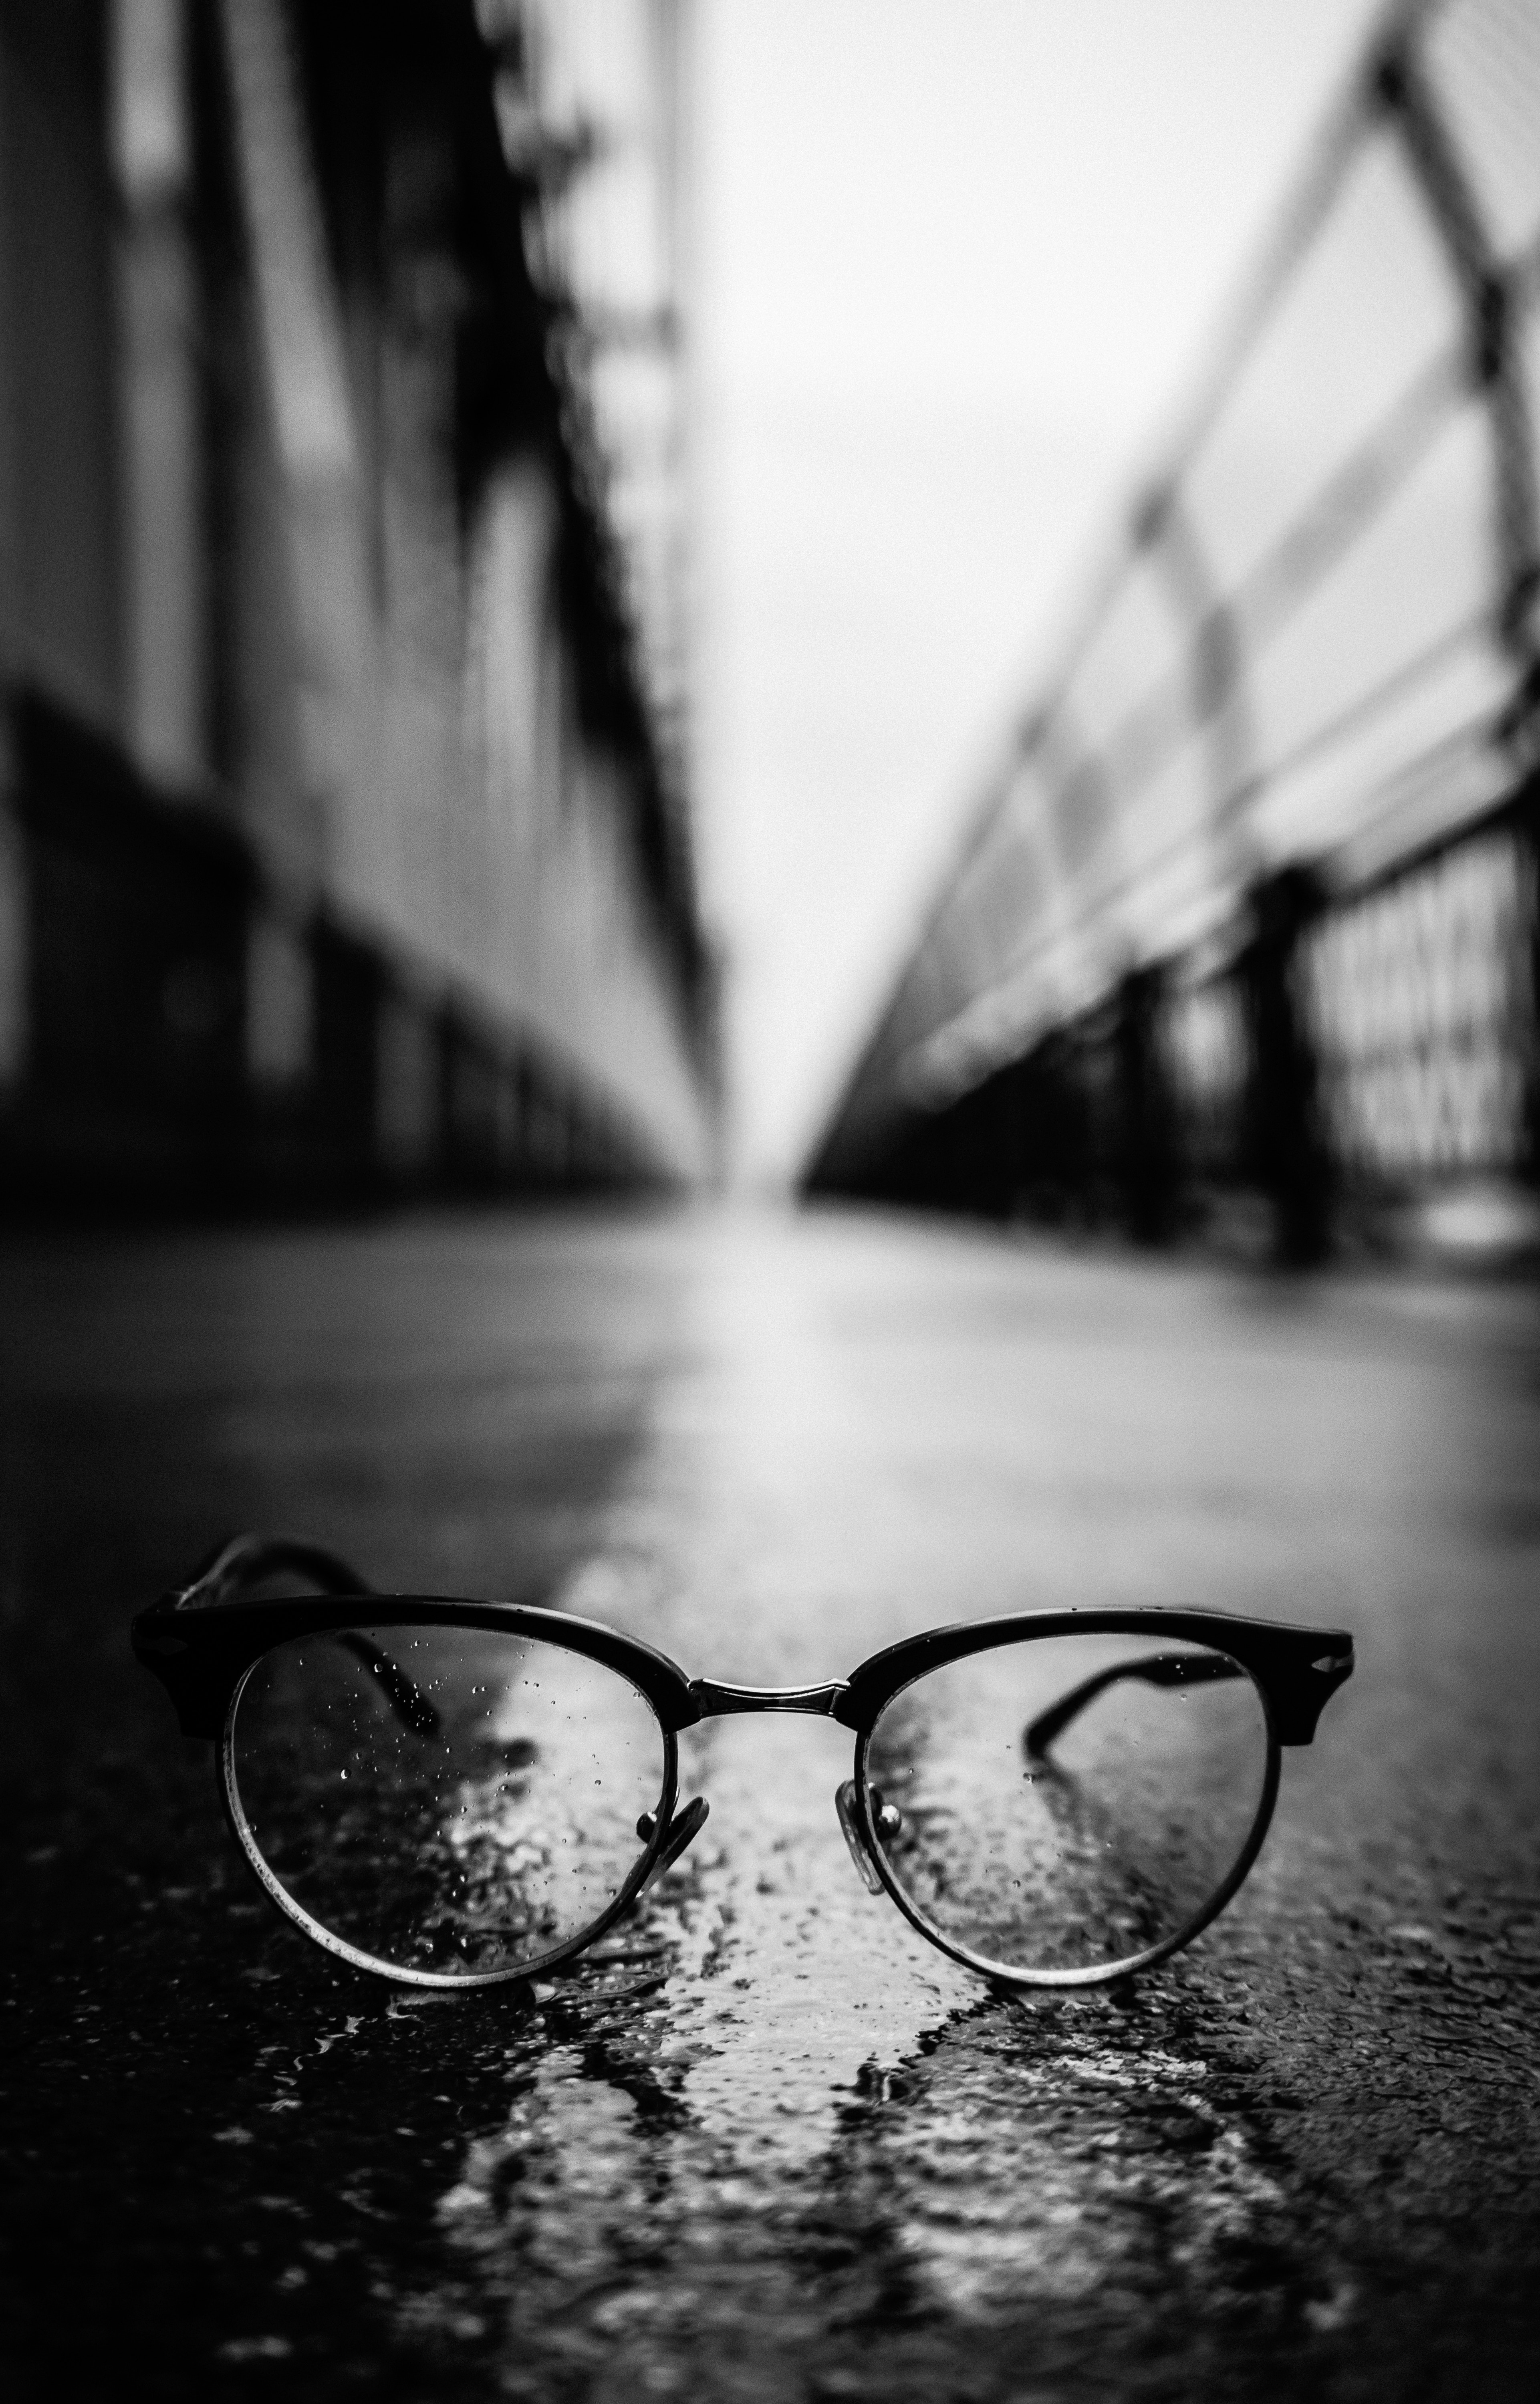 bw, close up, dark, chb, glasses, spectacles wallpapers for tablet